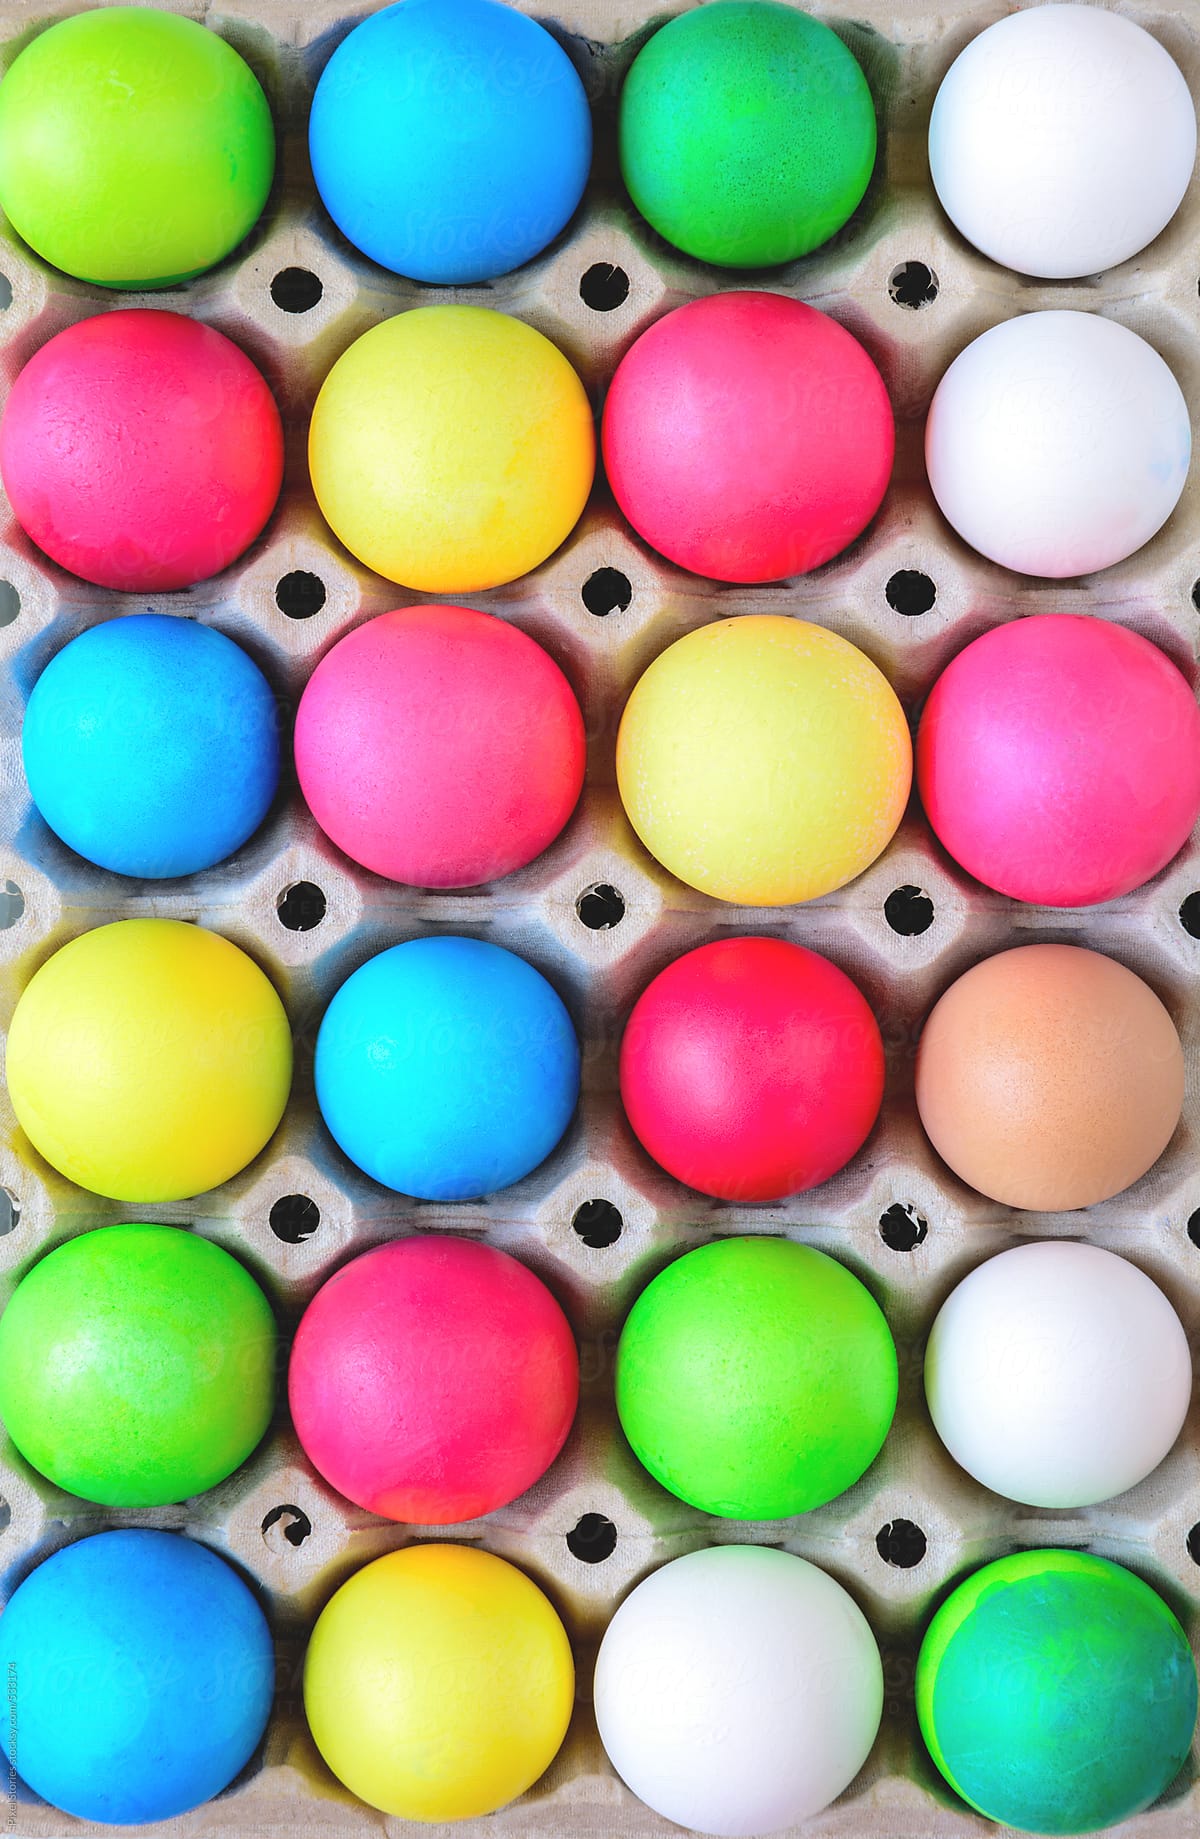 Colorful eggs for Easter in egg carton